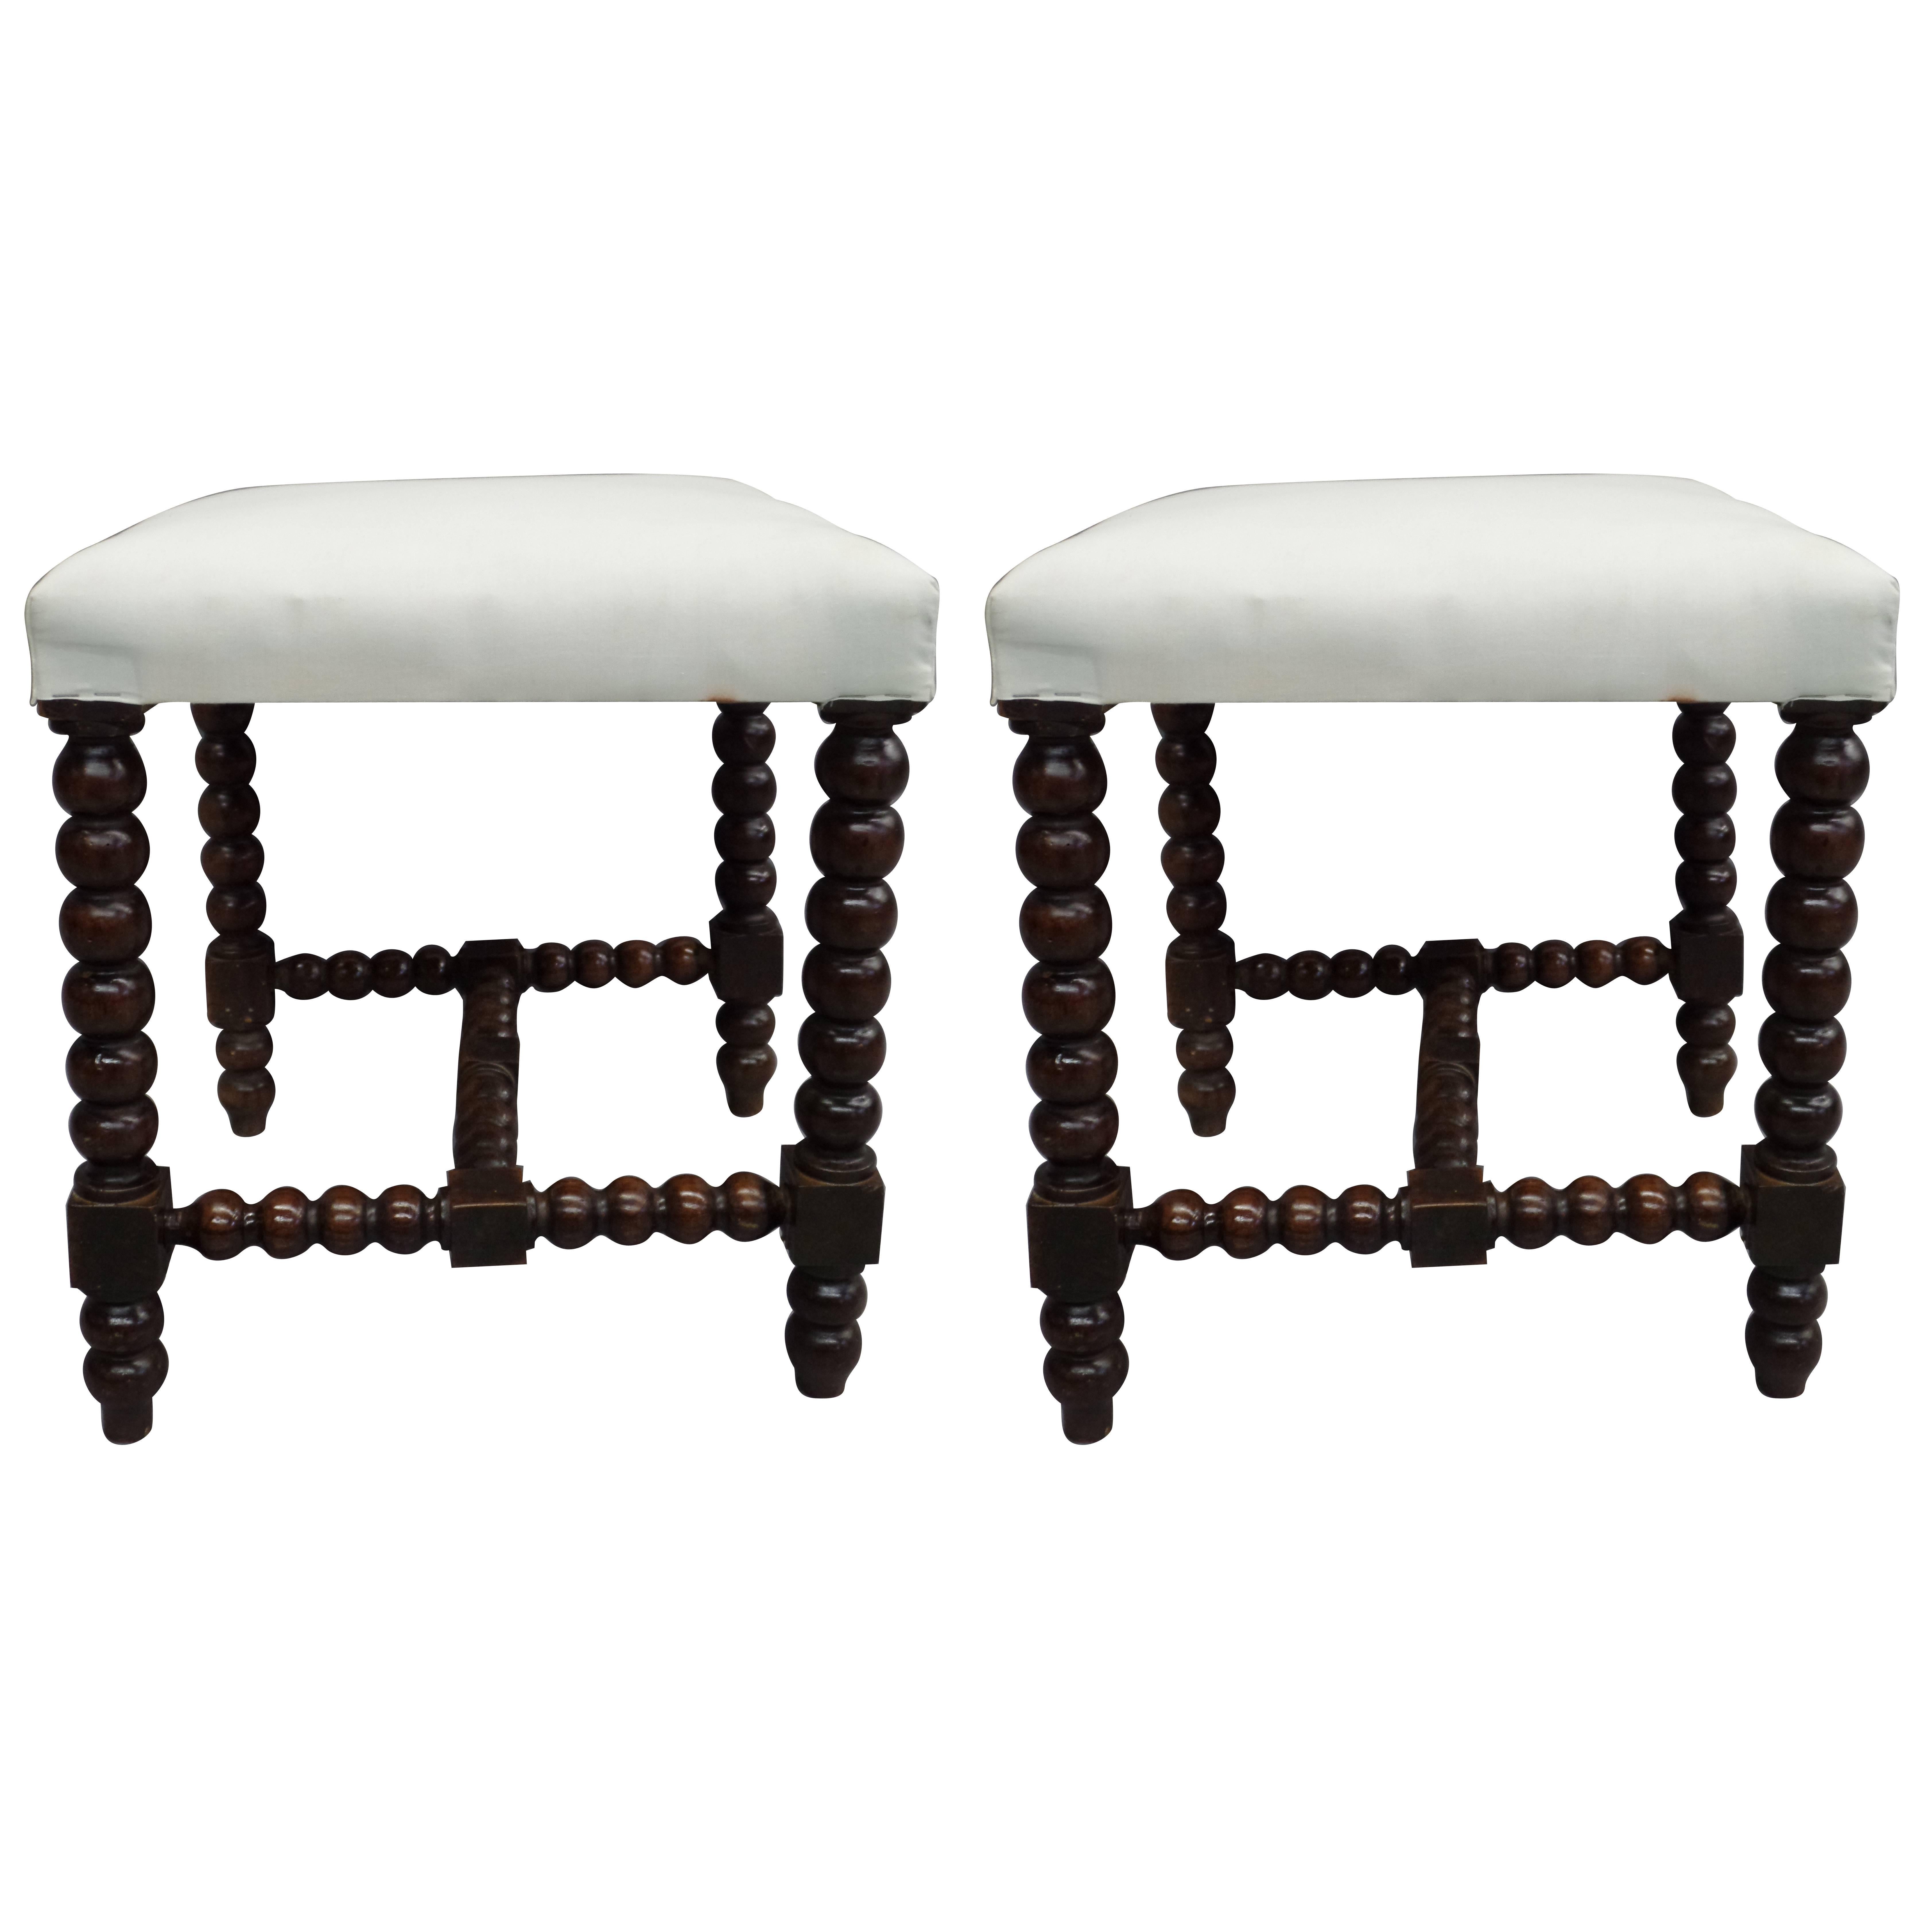 Pair French Modern Neoclassical Hand-Carved Wood Stacked Ball Benches / Stools